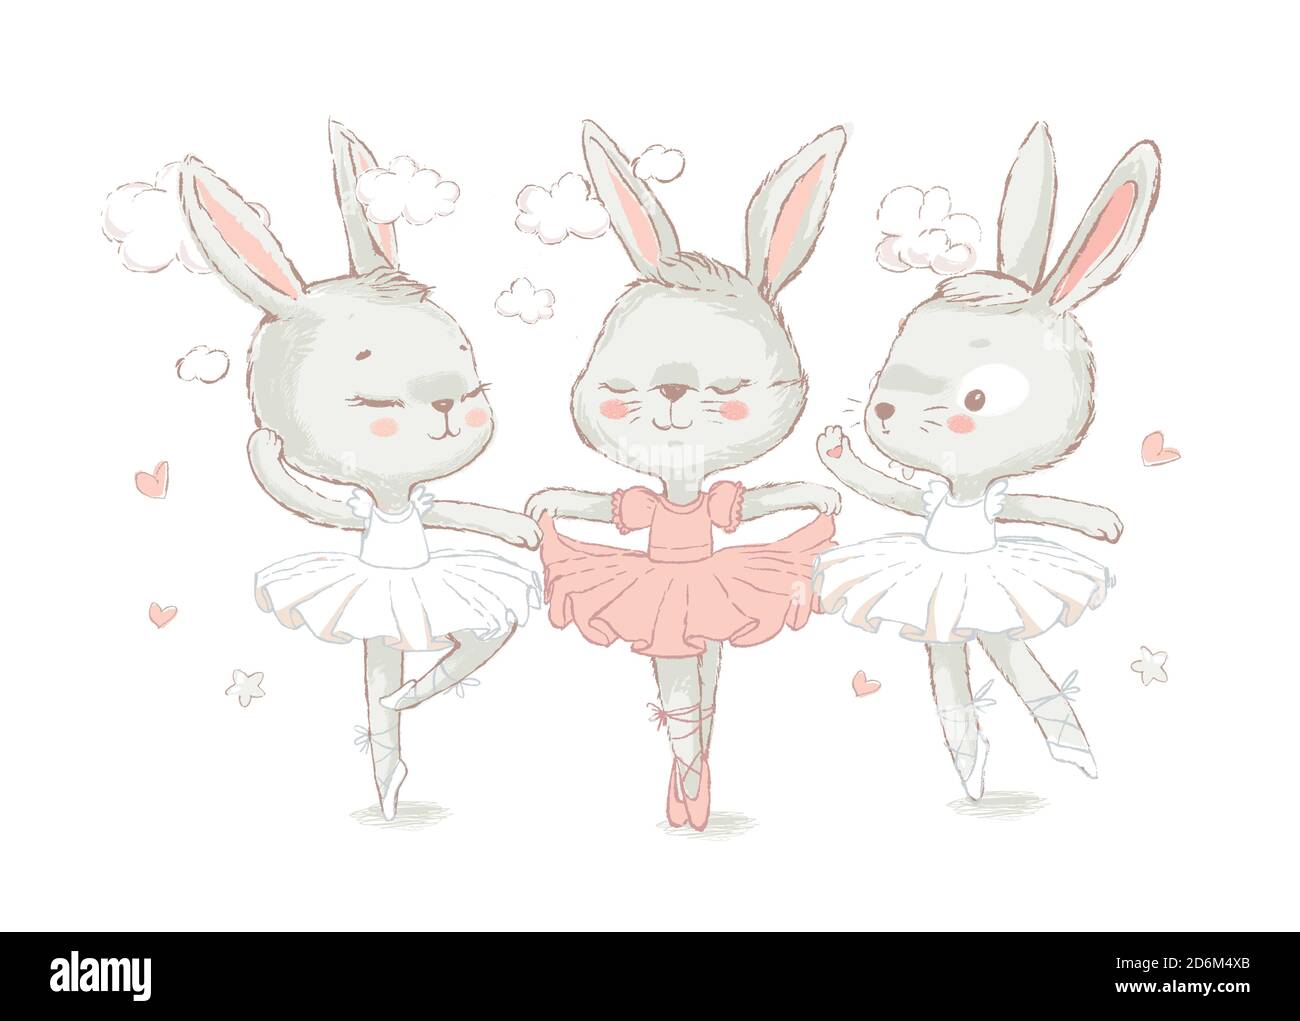 3 Sweet ballerina bunnys illustration vector for print design and other uses. White dancing rabbits illuatration. Can be used for t-shirt print, kids Stock Vector